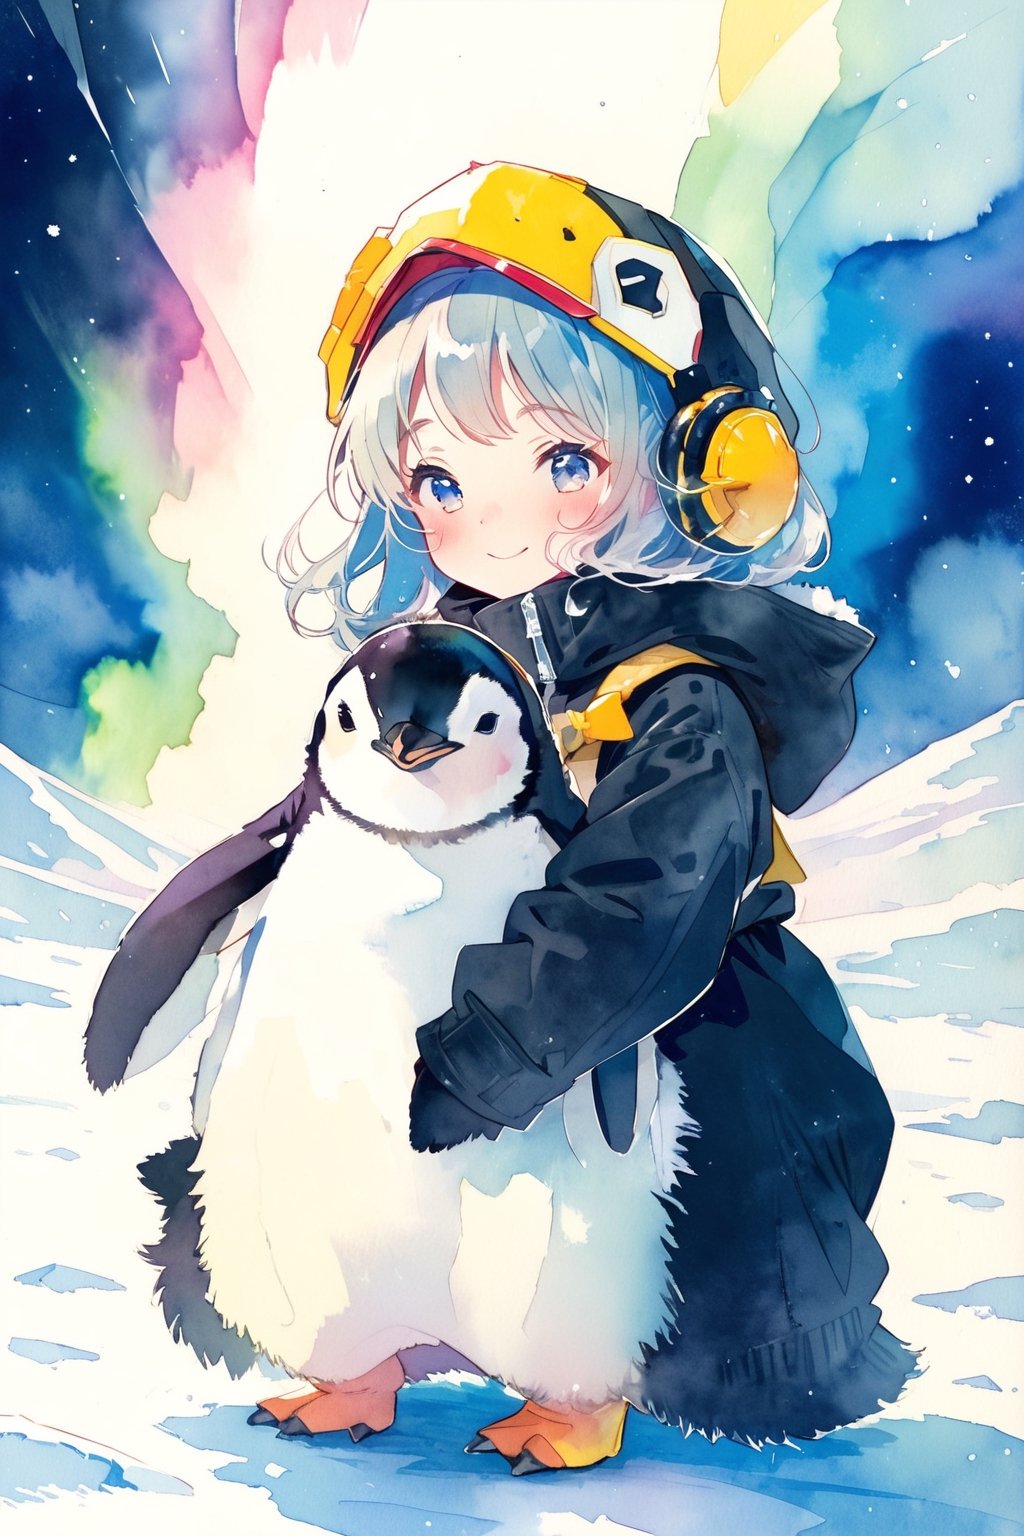 //quality, (masterpiece:1.331), (detailed), ((,best quality,)),//,close_up portrait of girl,1girl,(loli:1.1),//,white hair,detailed eyes,//,(penguin costume:1.3),(black|white penguin hood:1.4),(hood_up:1.1),long_sleeve, gloves,(black pantyhose:1.1), yellow boots,//,blush, happy_face,smile,//,(penguins:1.3),(hugging penguin:1.3),facing_viewer,//, ,ice,ice land,night, starry_night, (aurora:1.3),ice and snow,Penguin ,Bird ,Animal ,fluffy fur,aesthetic,watercolor \(medium\)